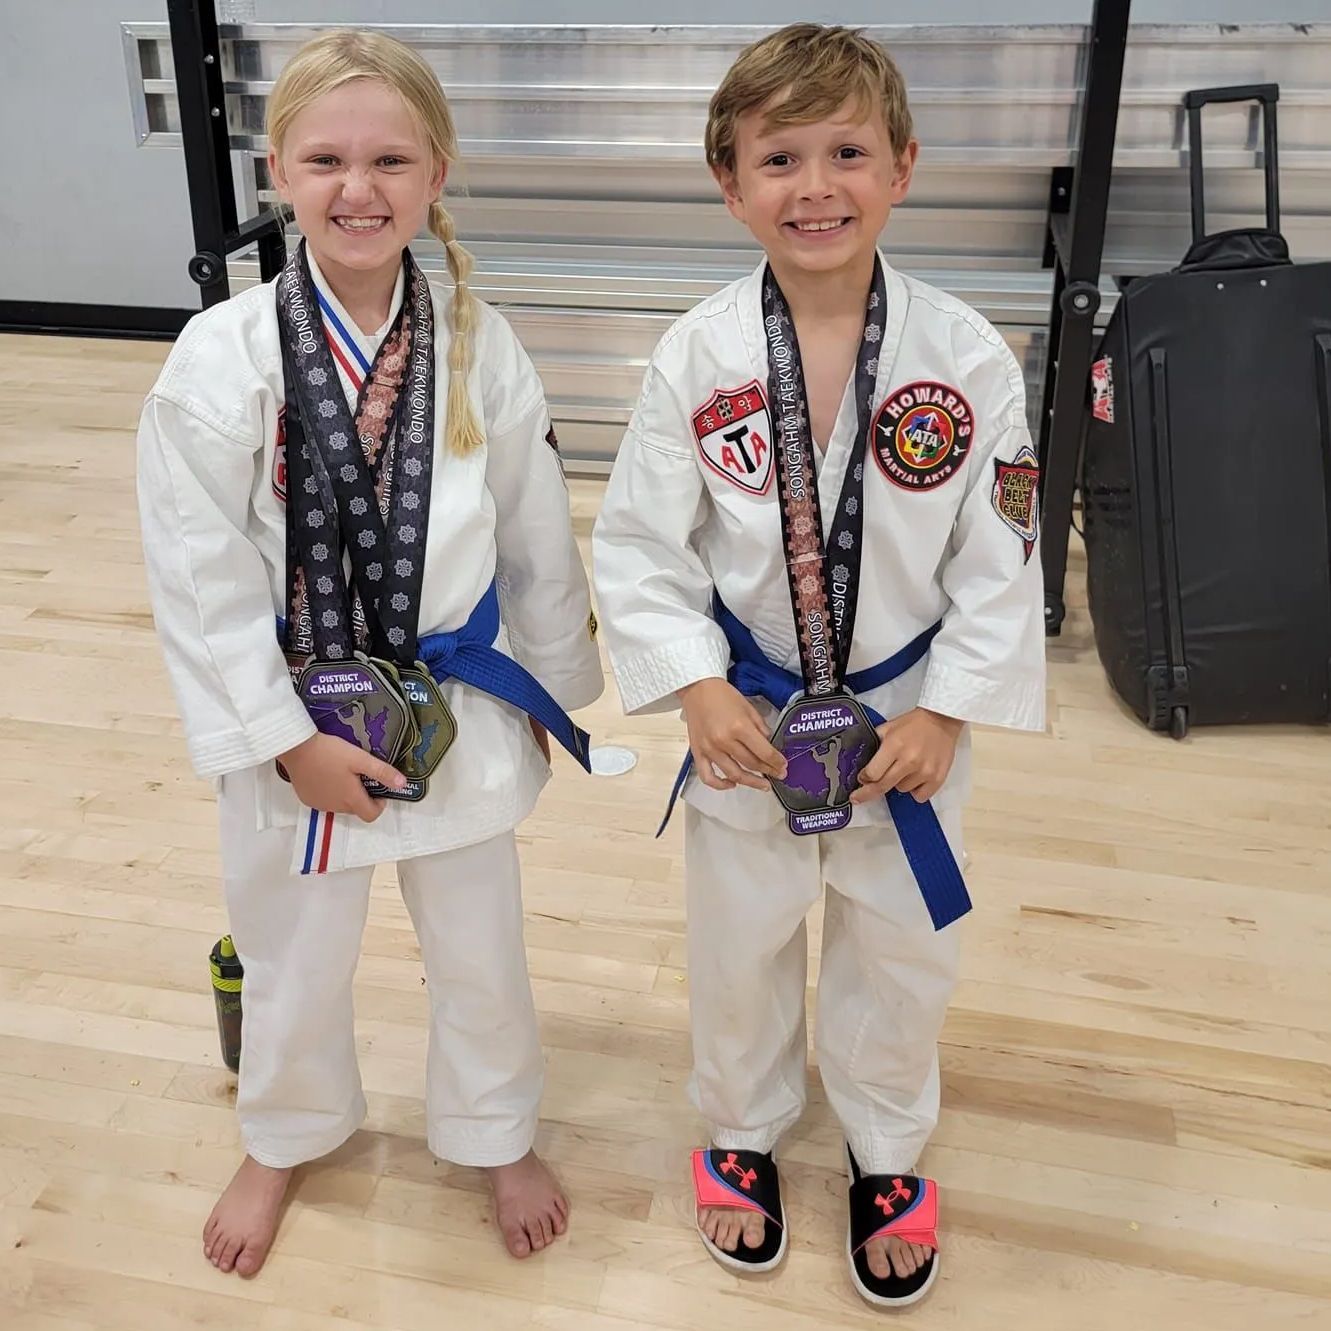 A boy and a girl are standing next to each other holding medals.